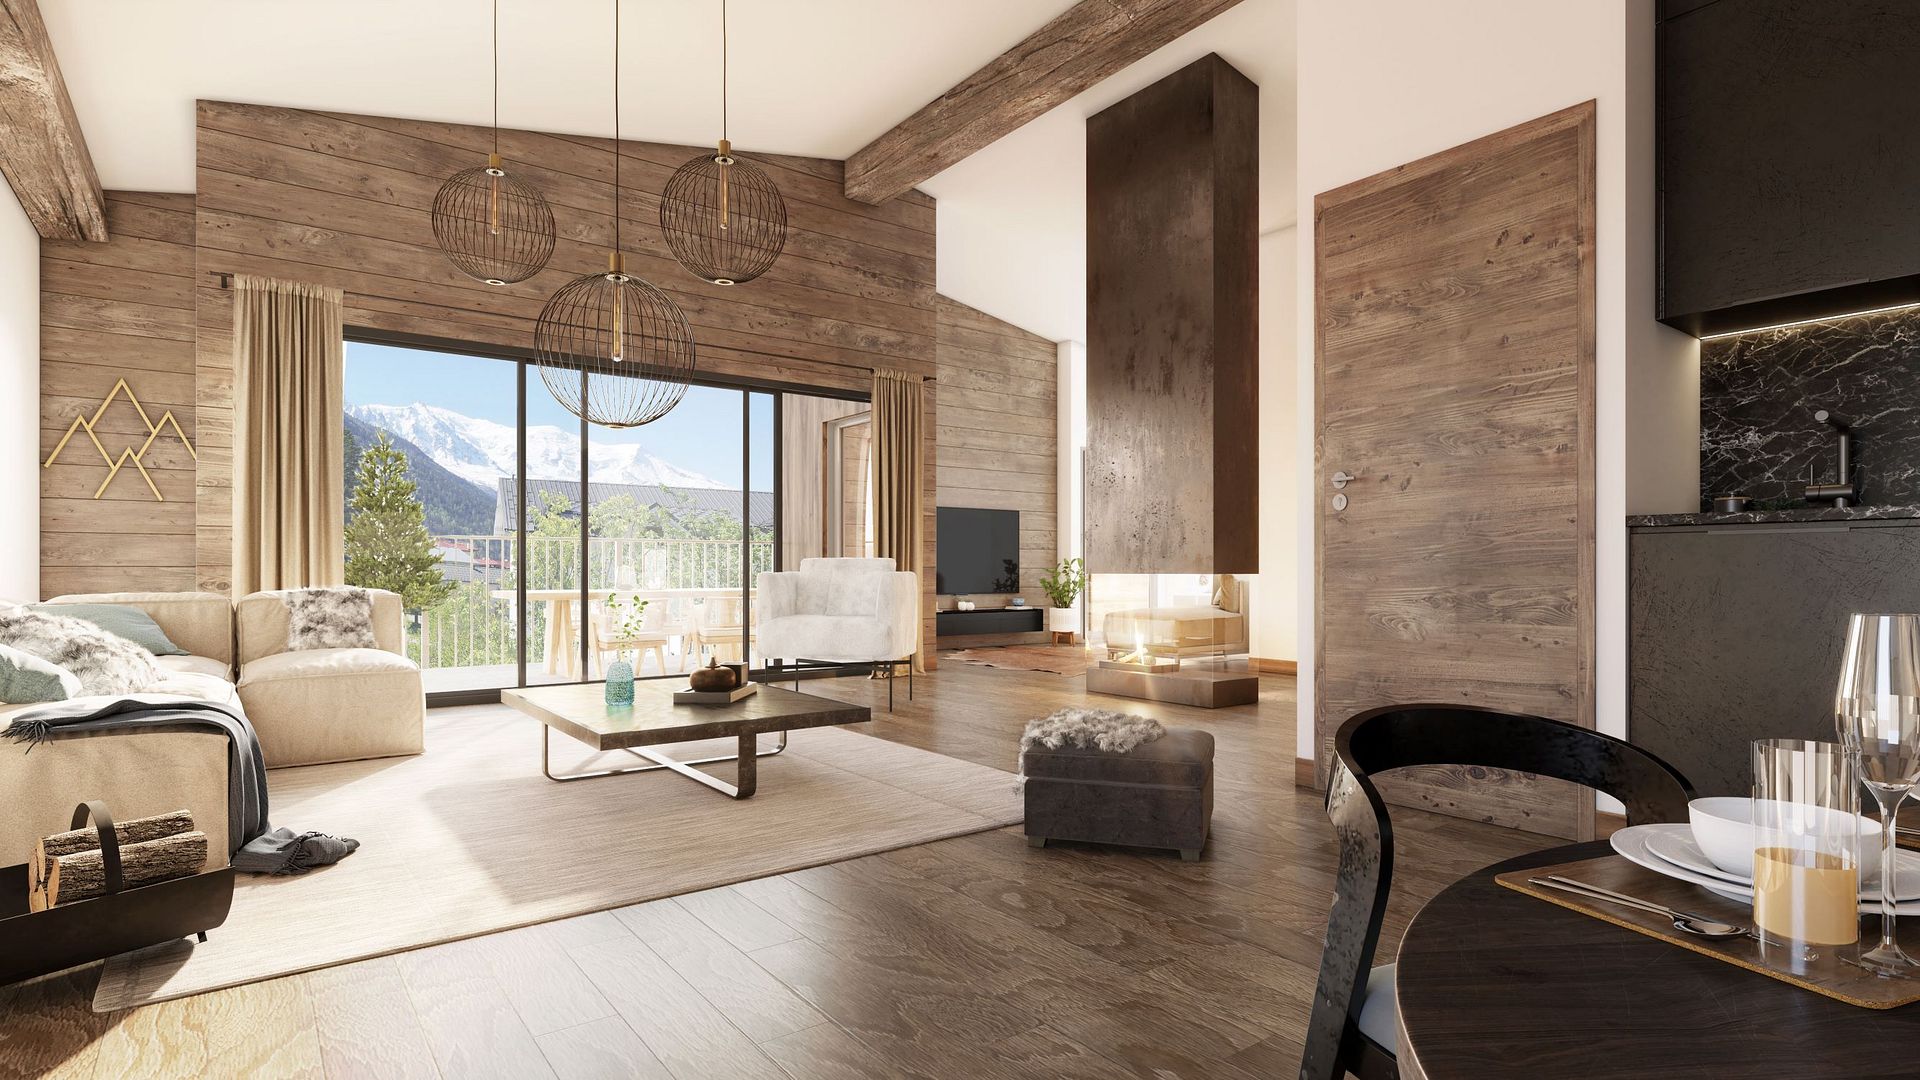 3 bed Apartment For Sale in Chamonix Mont Blanc, French Alps